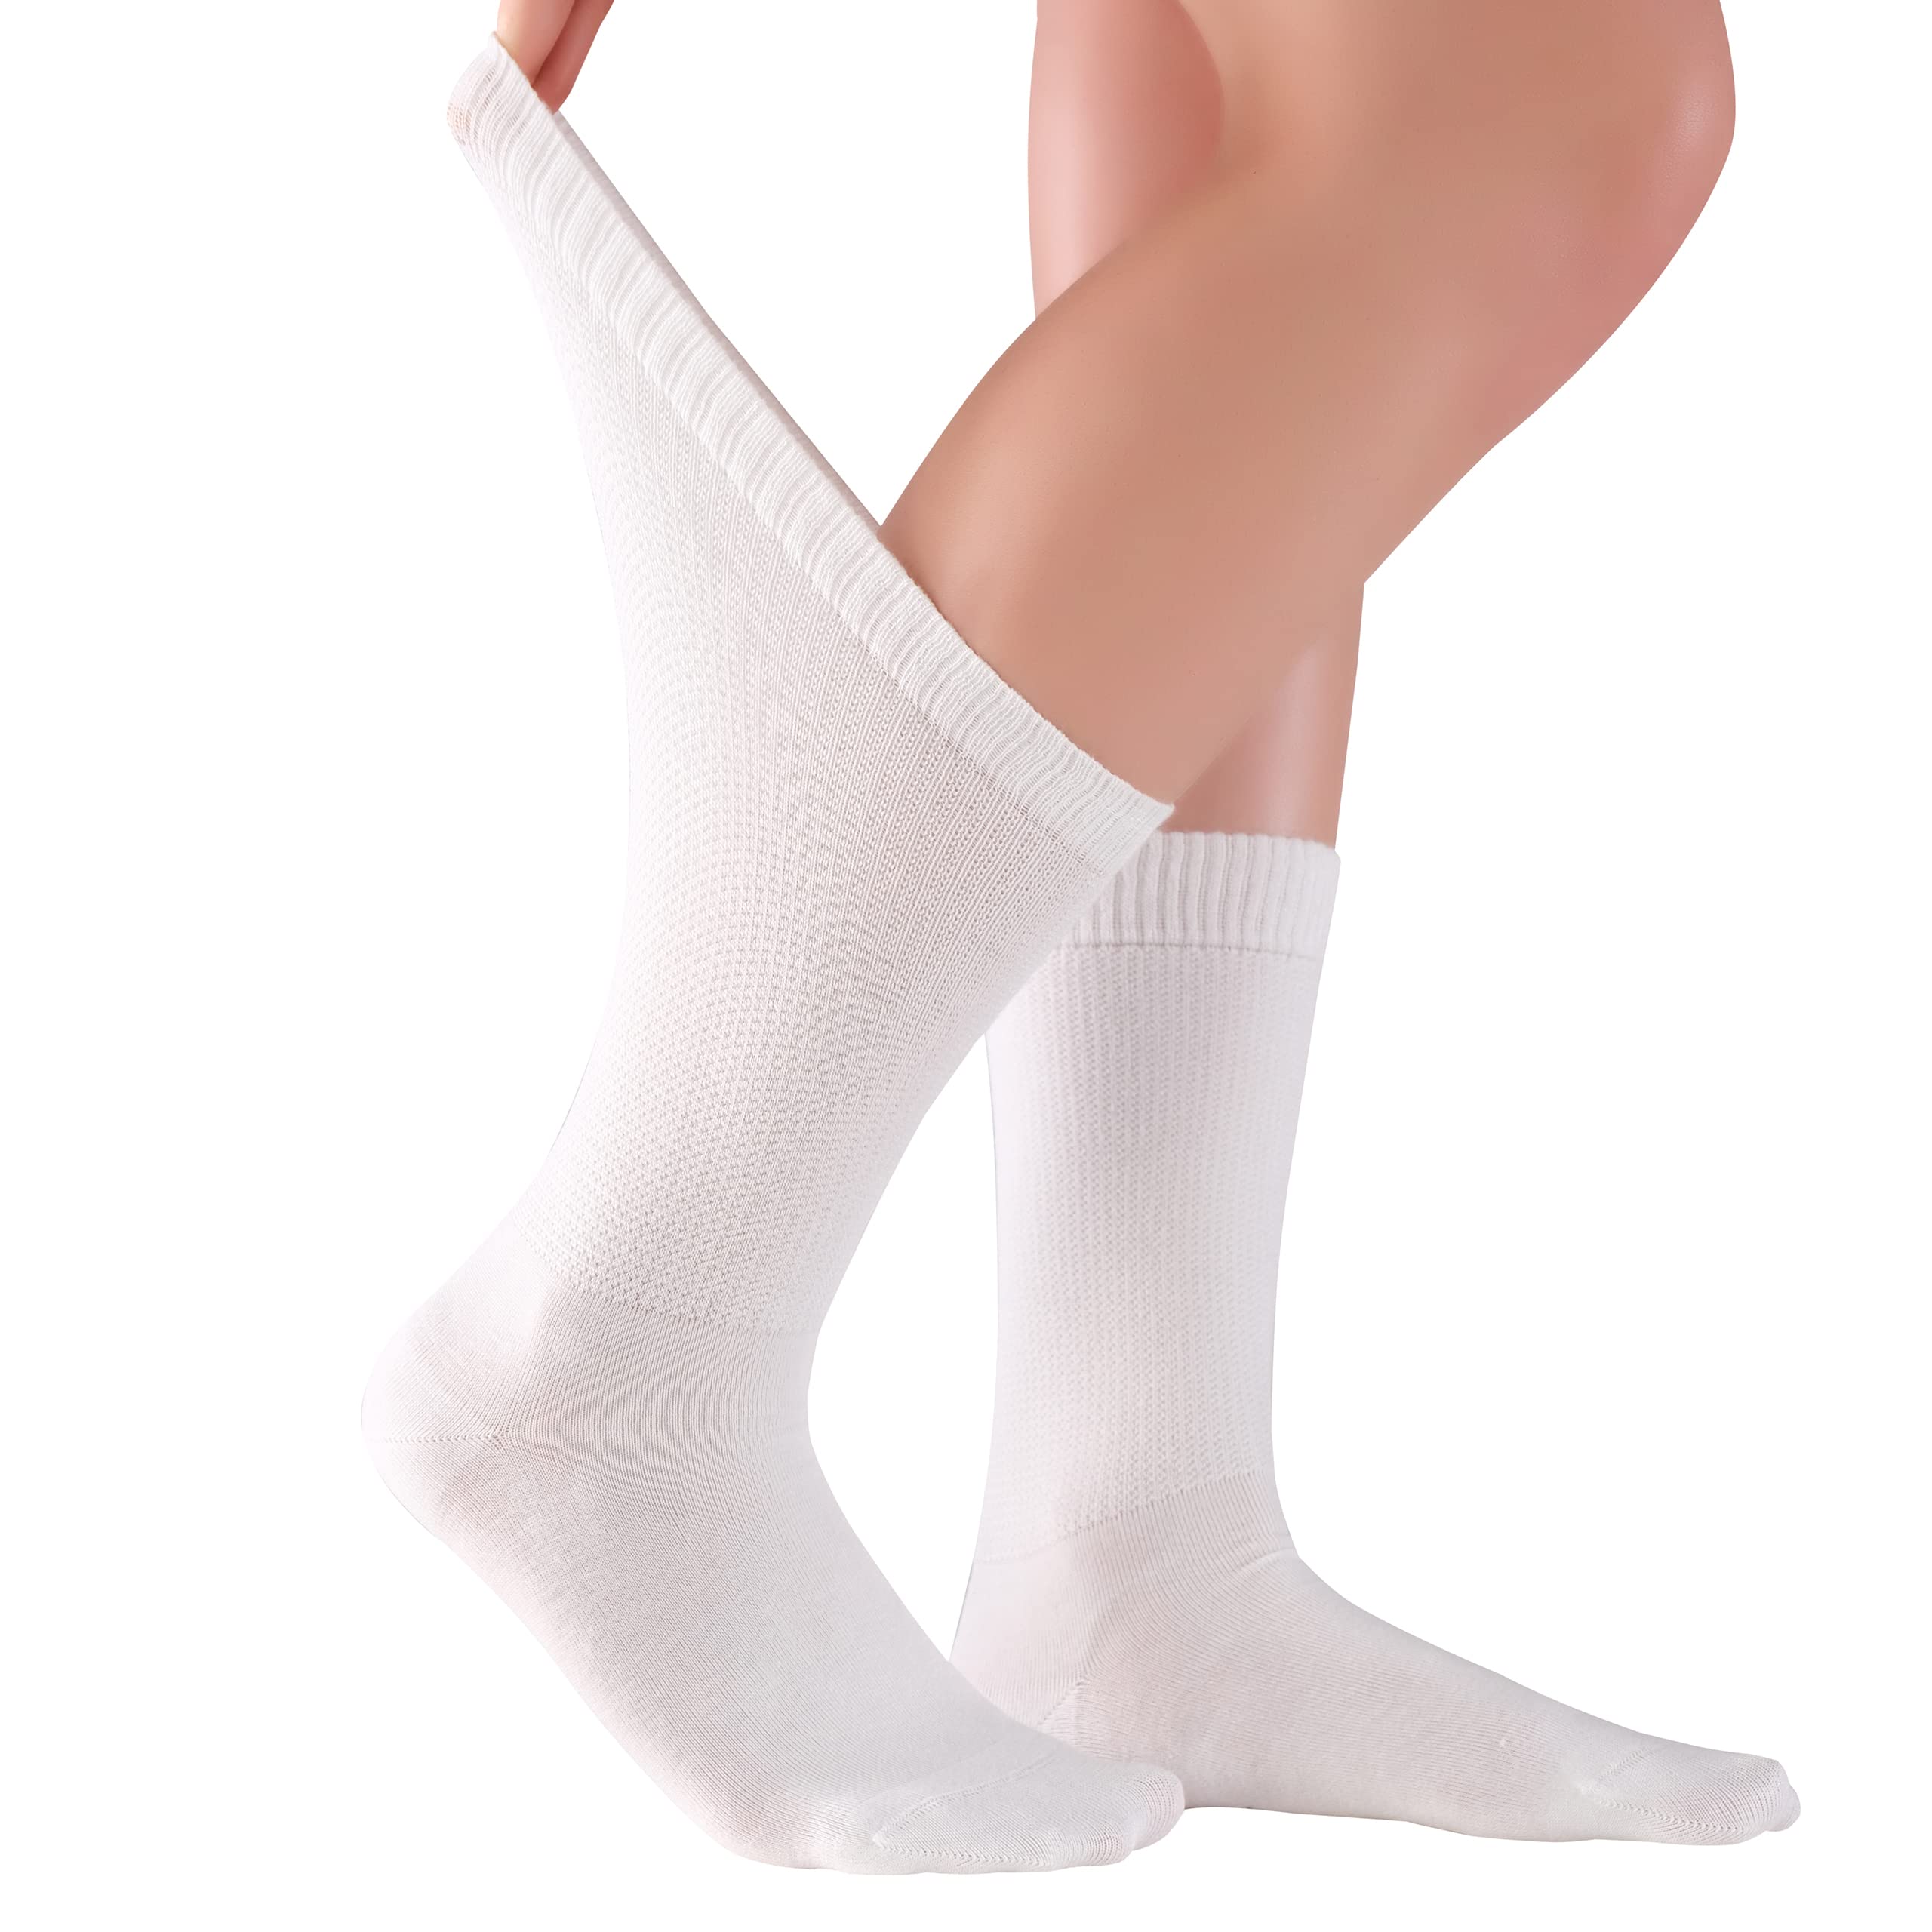 Diabetic Socks For Women - Available in 4, 8, 12, and 24 Pairs